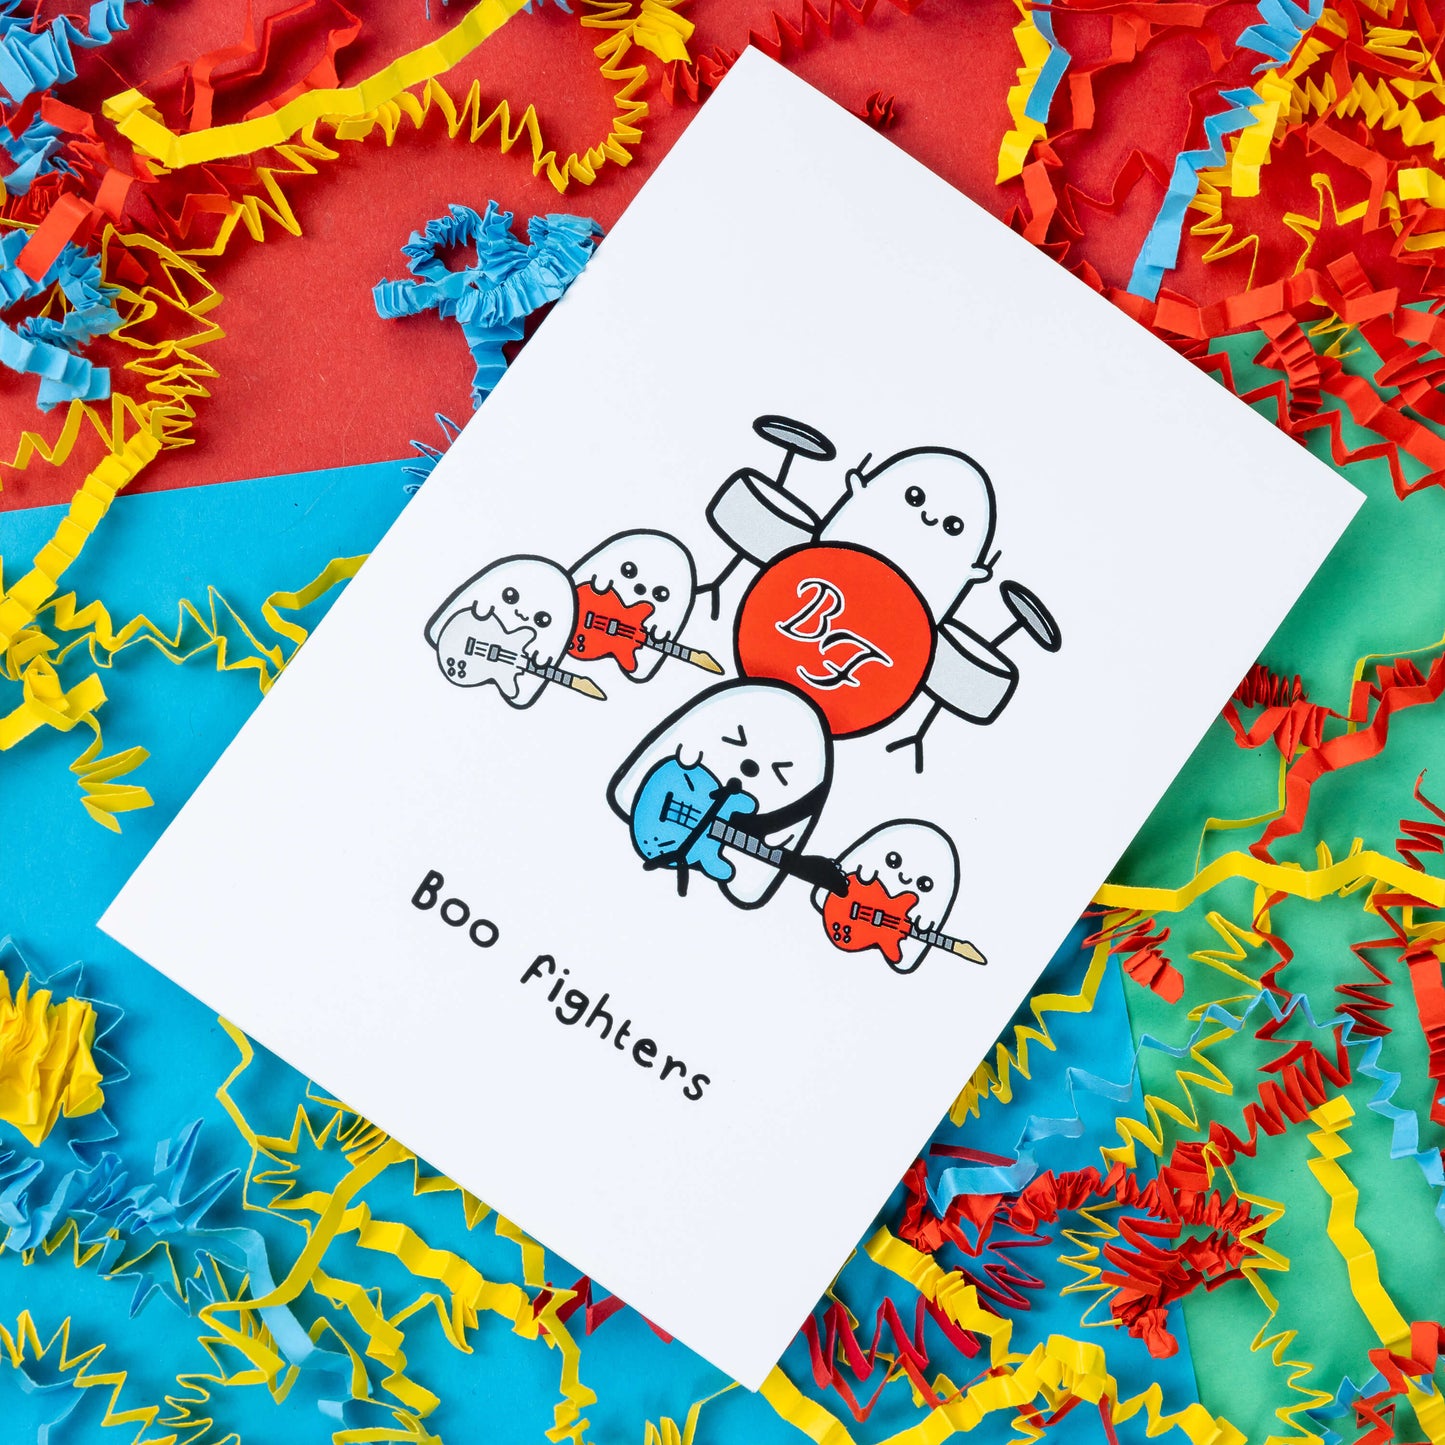 Boo Fighters Birthday Card on a green, blue and red background with red, blue and yellow crinkle confetti card. A white card with a kawaii ghost band playing blue, white and red guitars and a red Boo Fighters drum kit, underneath reads Boo Fighters in black text.